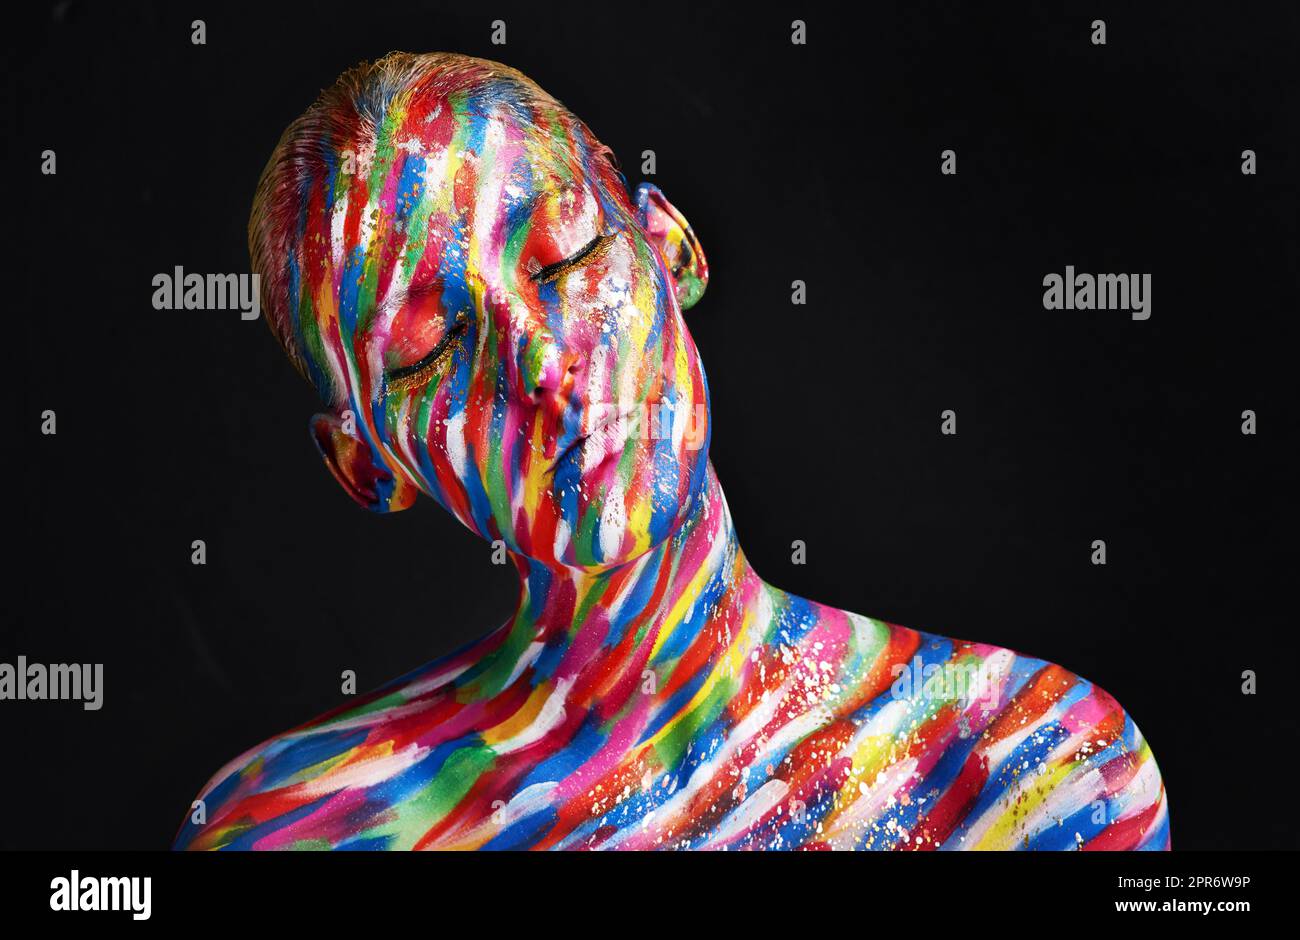 Dare to do beauty differently. Studio shot of a young woman posing with brightly colored paint on her face against a black background. Stock Photo